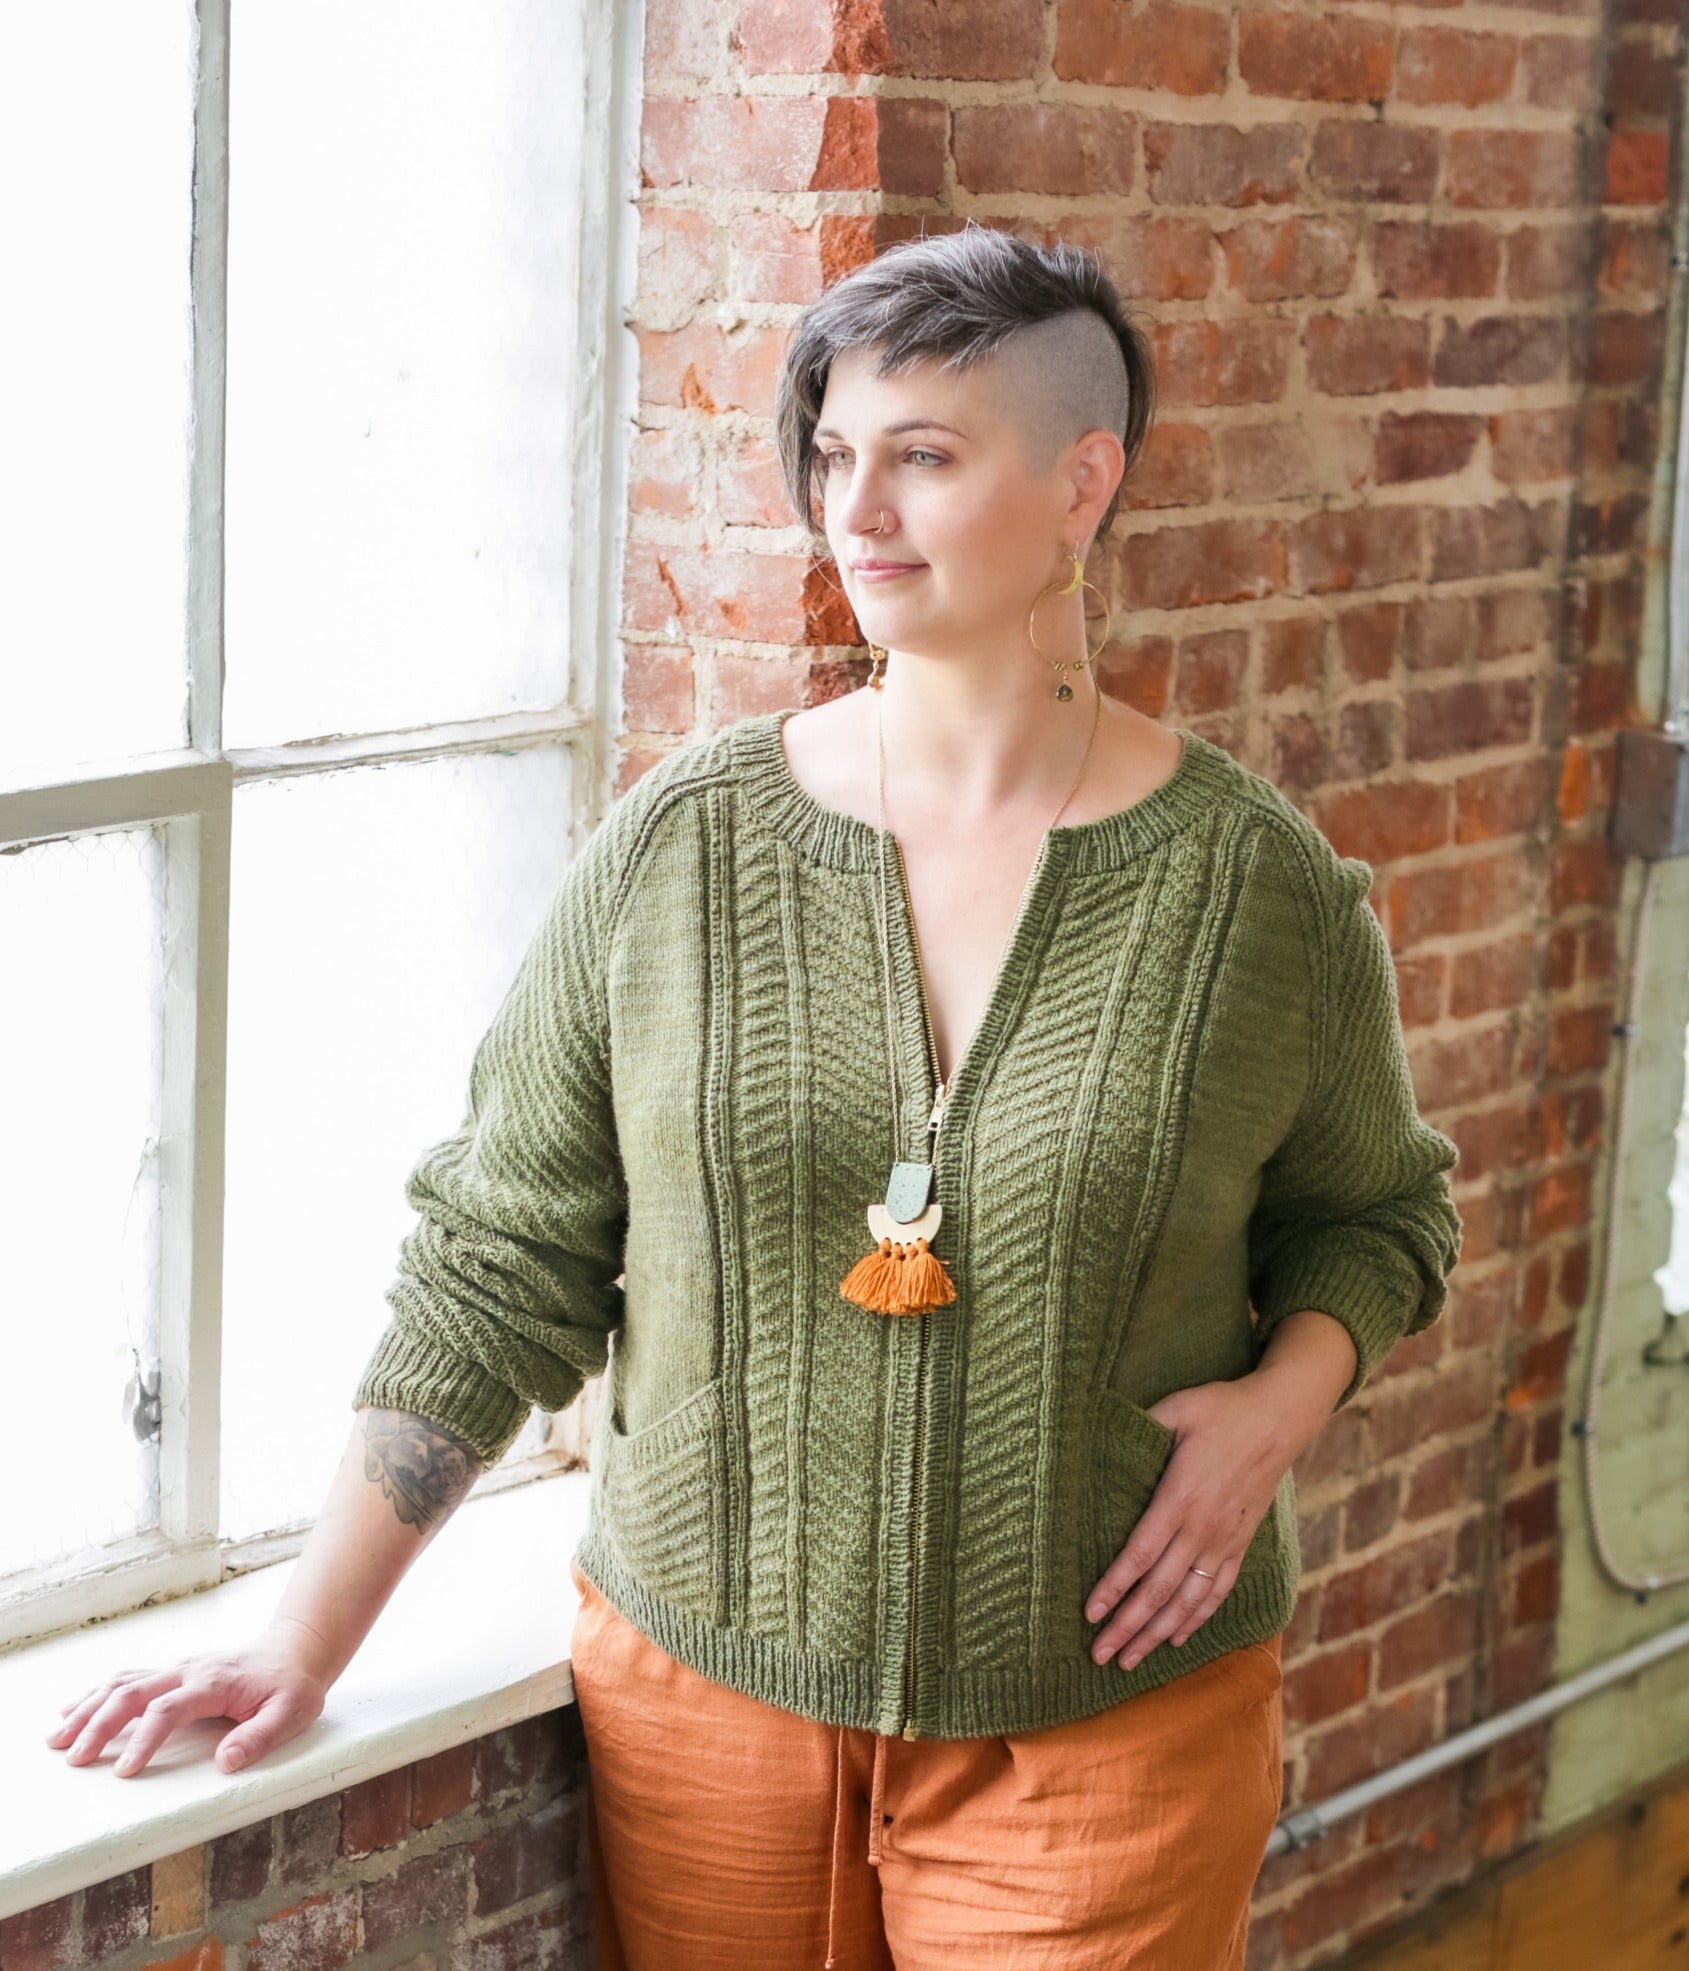 Jen stands next to a window, wearing orange pants with a partially zipped cardigan. The cardigan, knit in green yarn, has two slanted front pockets and a large chevron pattern down the front and arms.